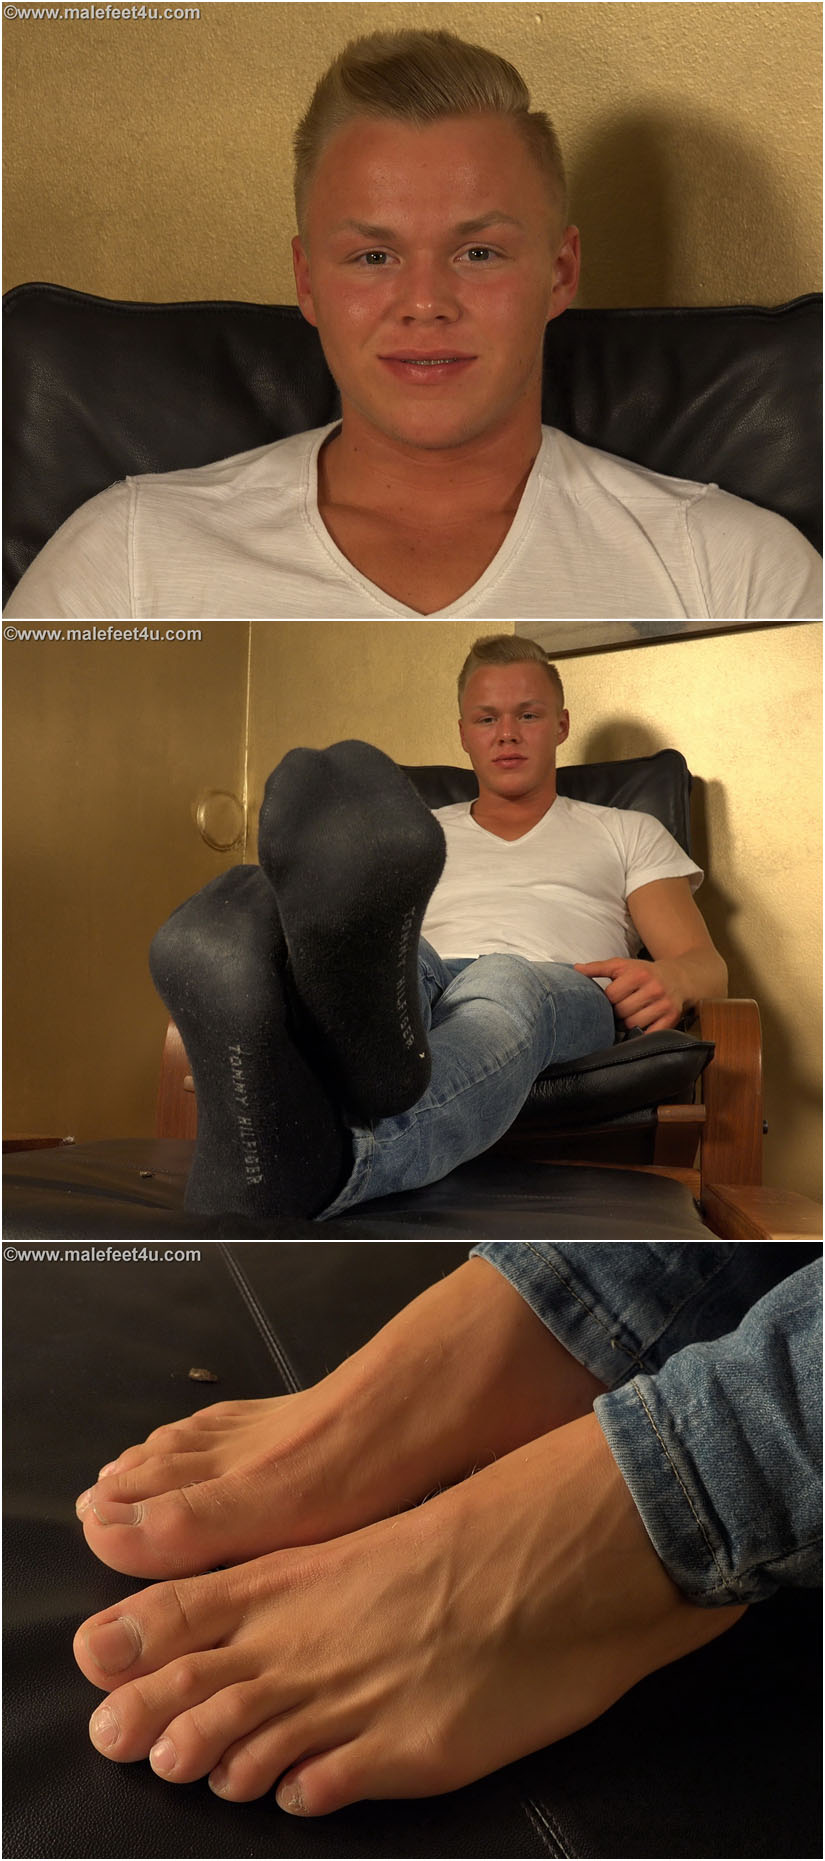 Boda Gold from Male Feet 4 U shows his bare feet